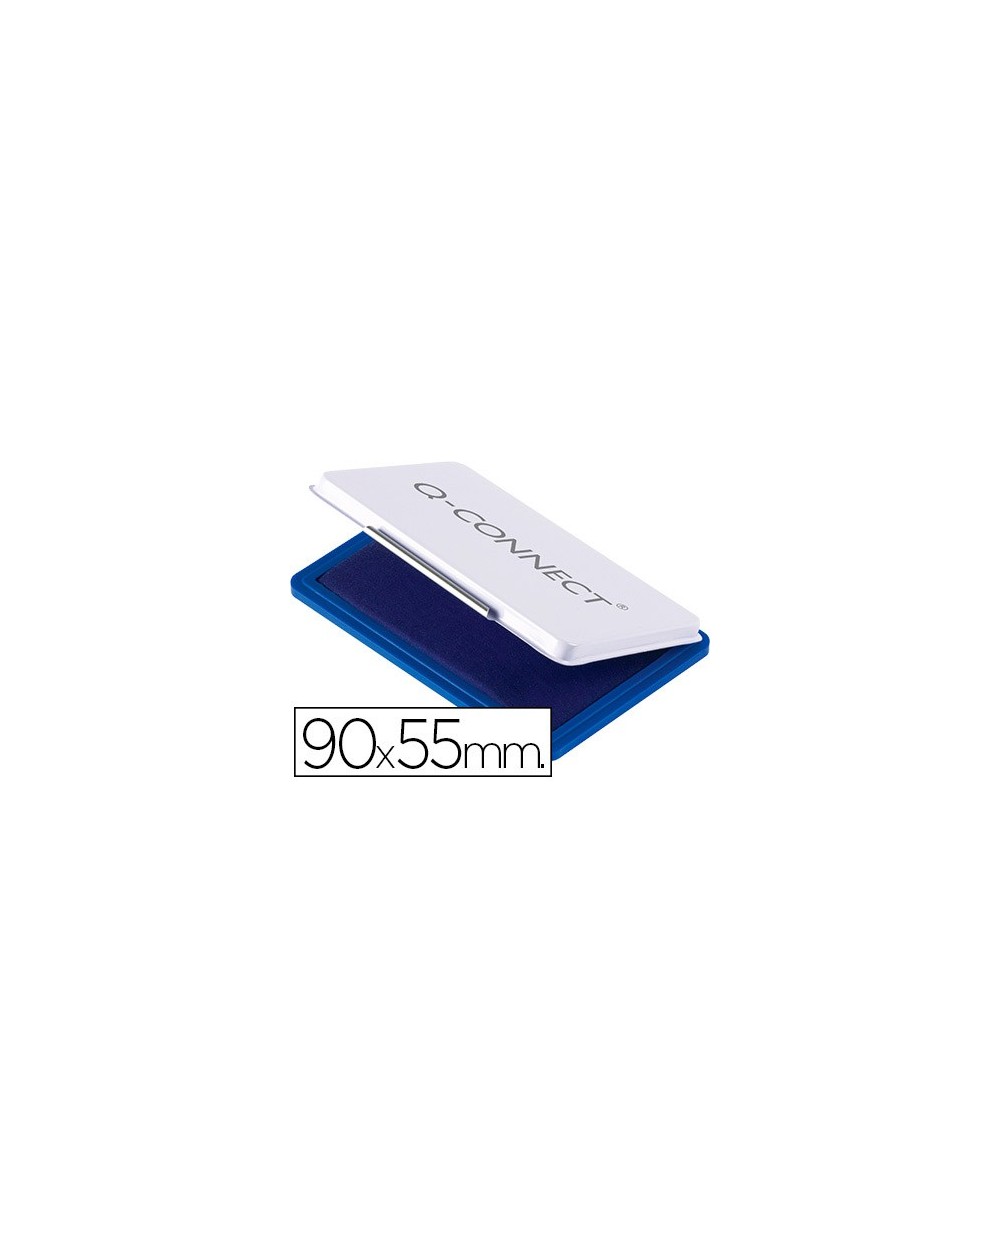 Tampon q connect n3 90x55 mm azul